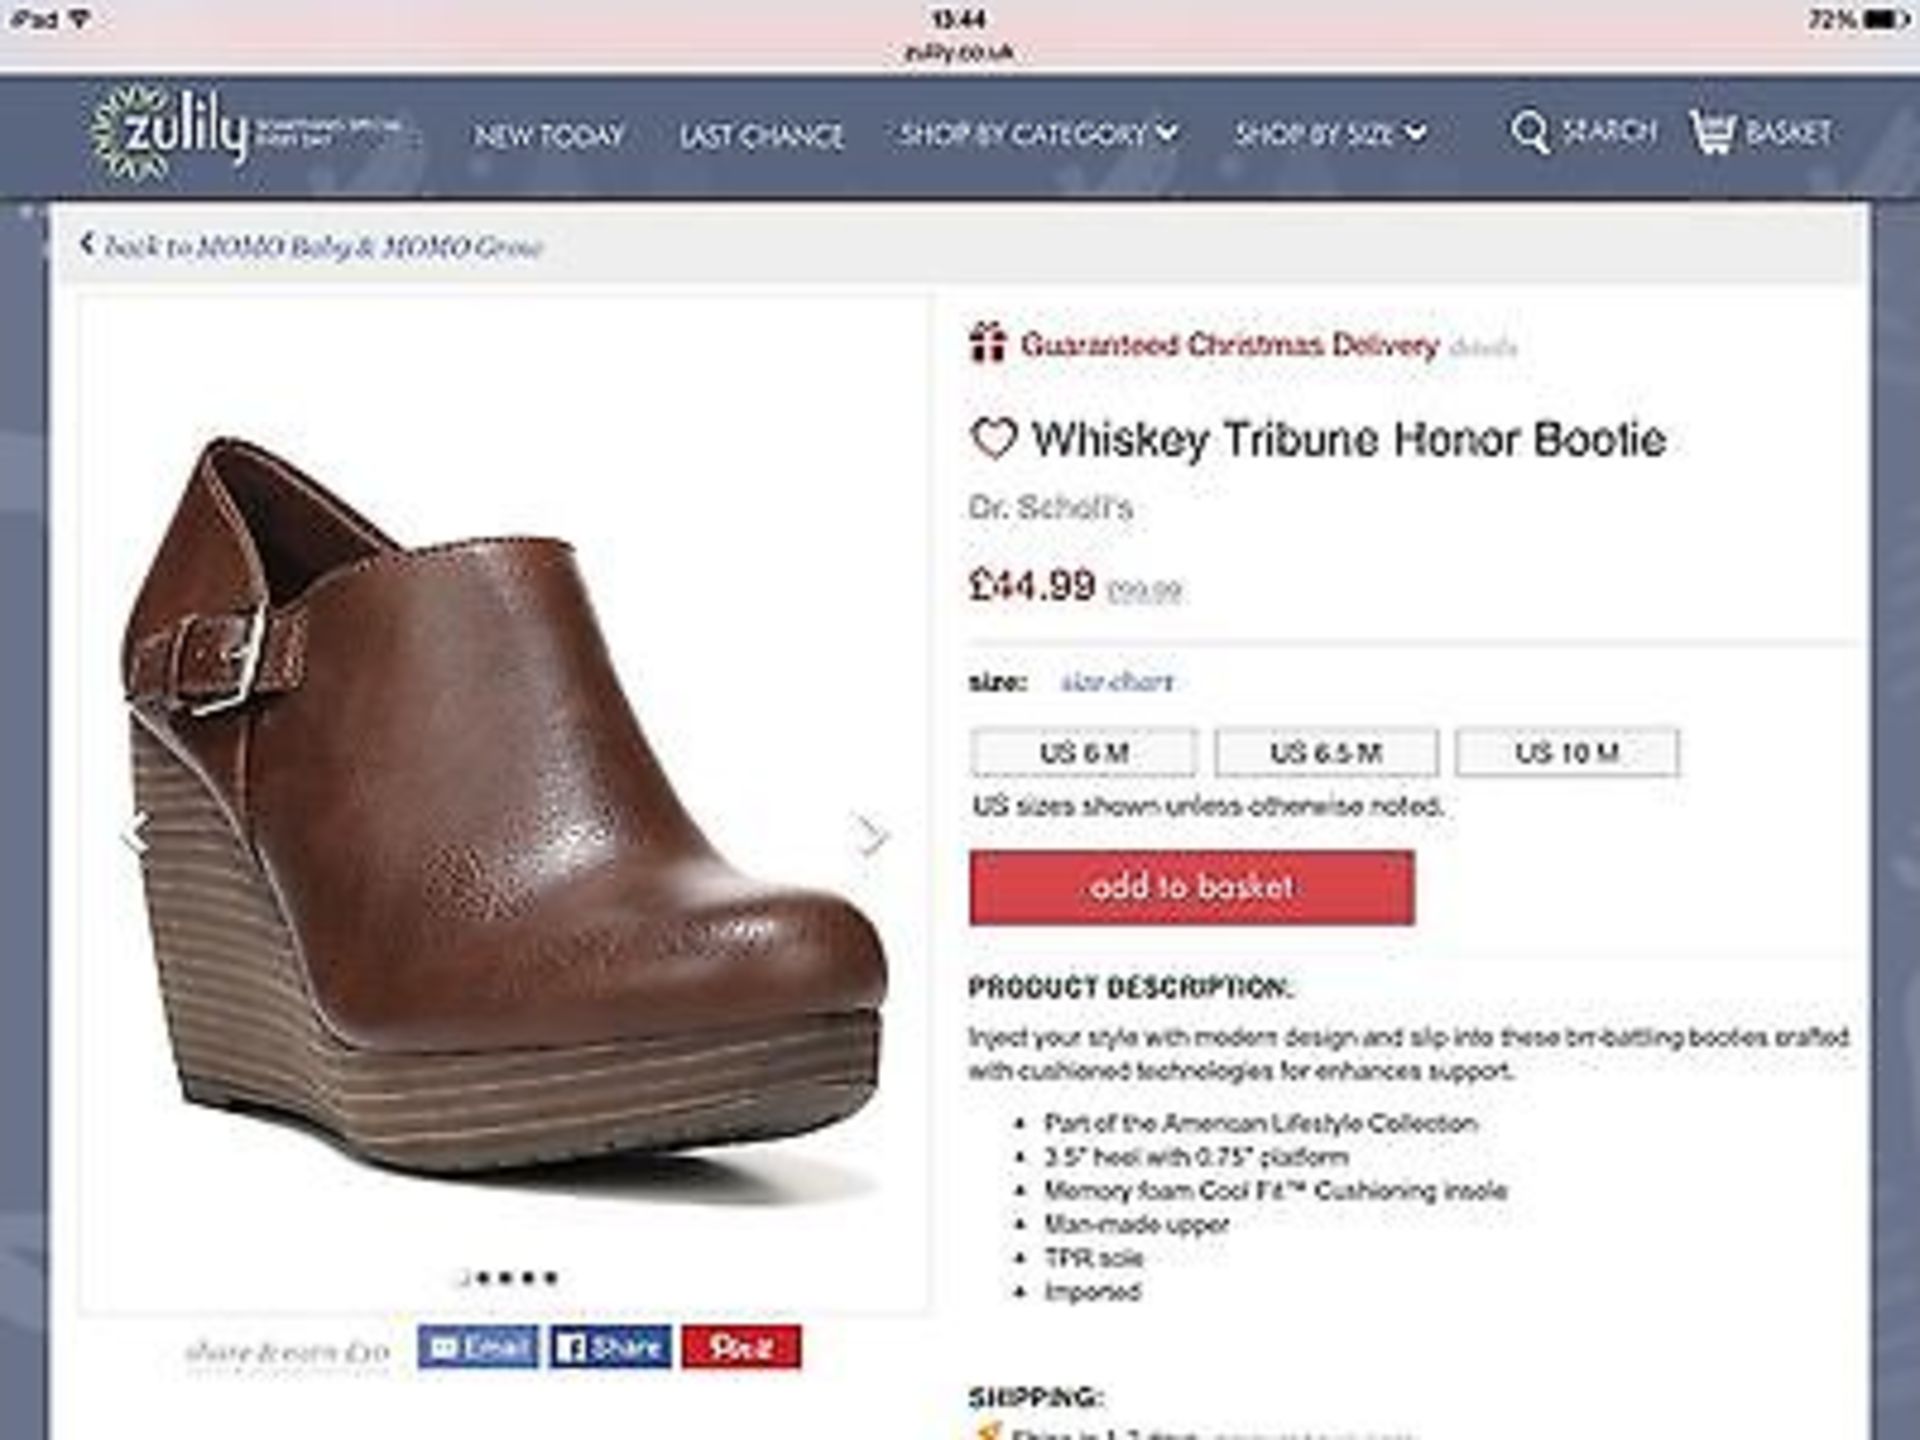 Dr Scholl's Whiskey Tribune Honor Bootie, Size 7.5, RRP £ (New with box) [Ref: H-002] - Image 6 of 6